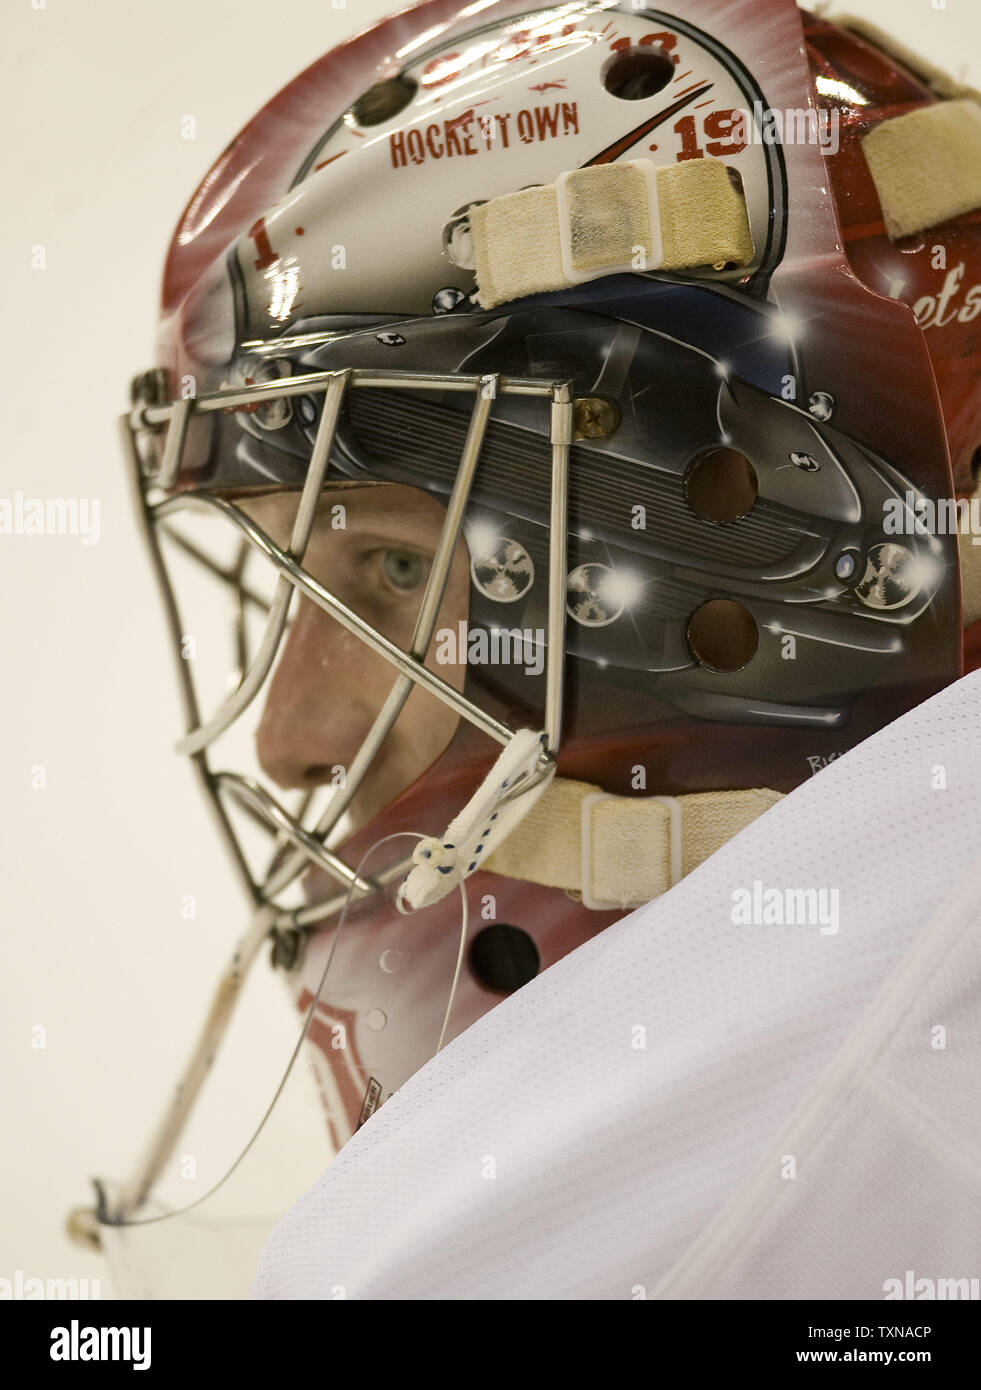 Detroit Red Wings goalie Jimmy Howard watches the Colorado Avalanche during warm ups at the Pepsi Center on March 1, 2010 in Denver.   Howard and the Red Wings beat the Avalanche 3-2.  The NHL returns to action one day after the 2010 Winter Olympics ended in Vancouver.            UPI/Gary C. Caskey Stock Photo